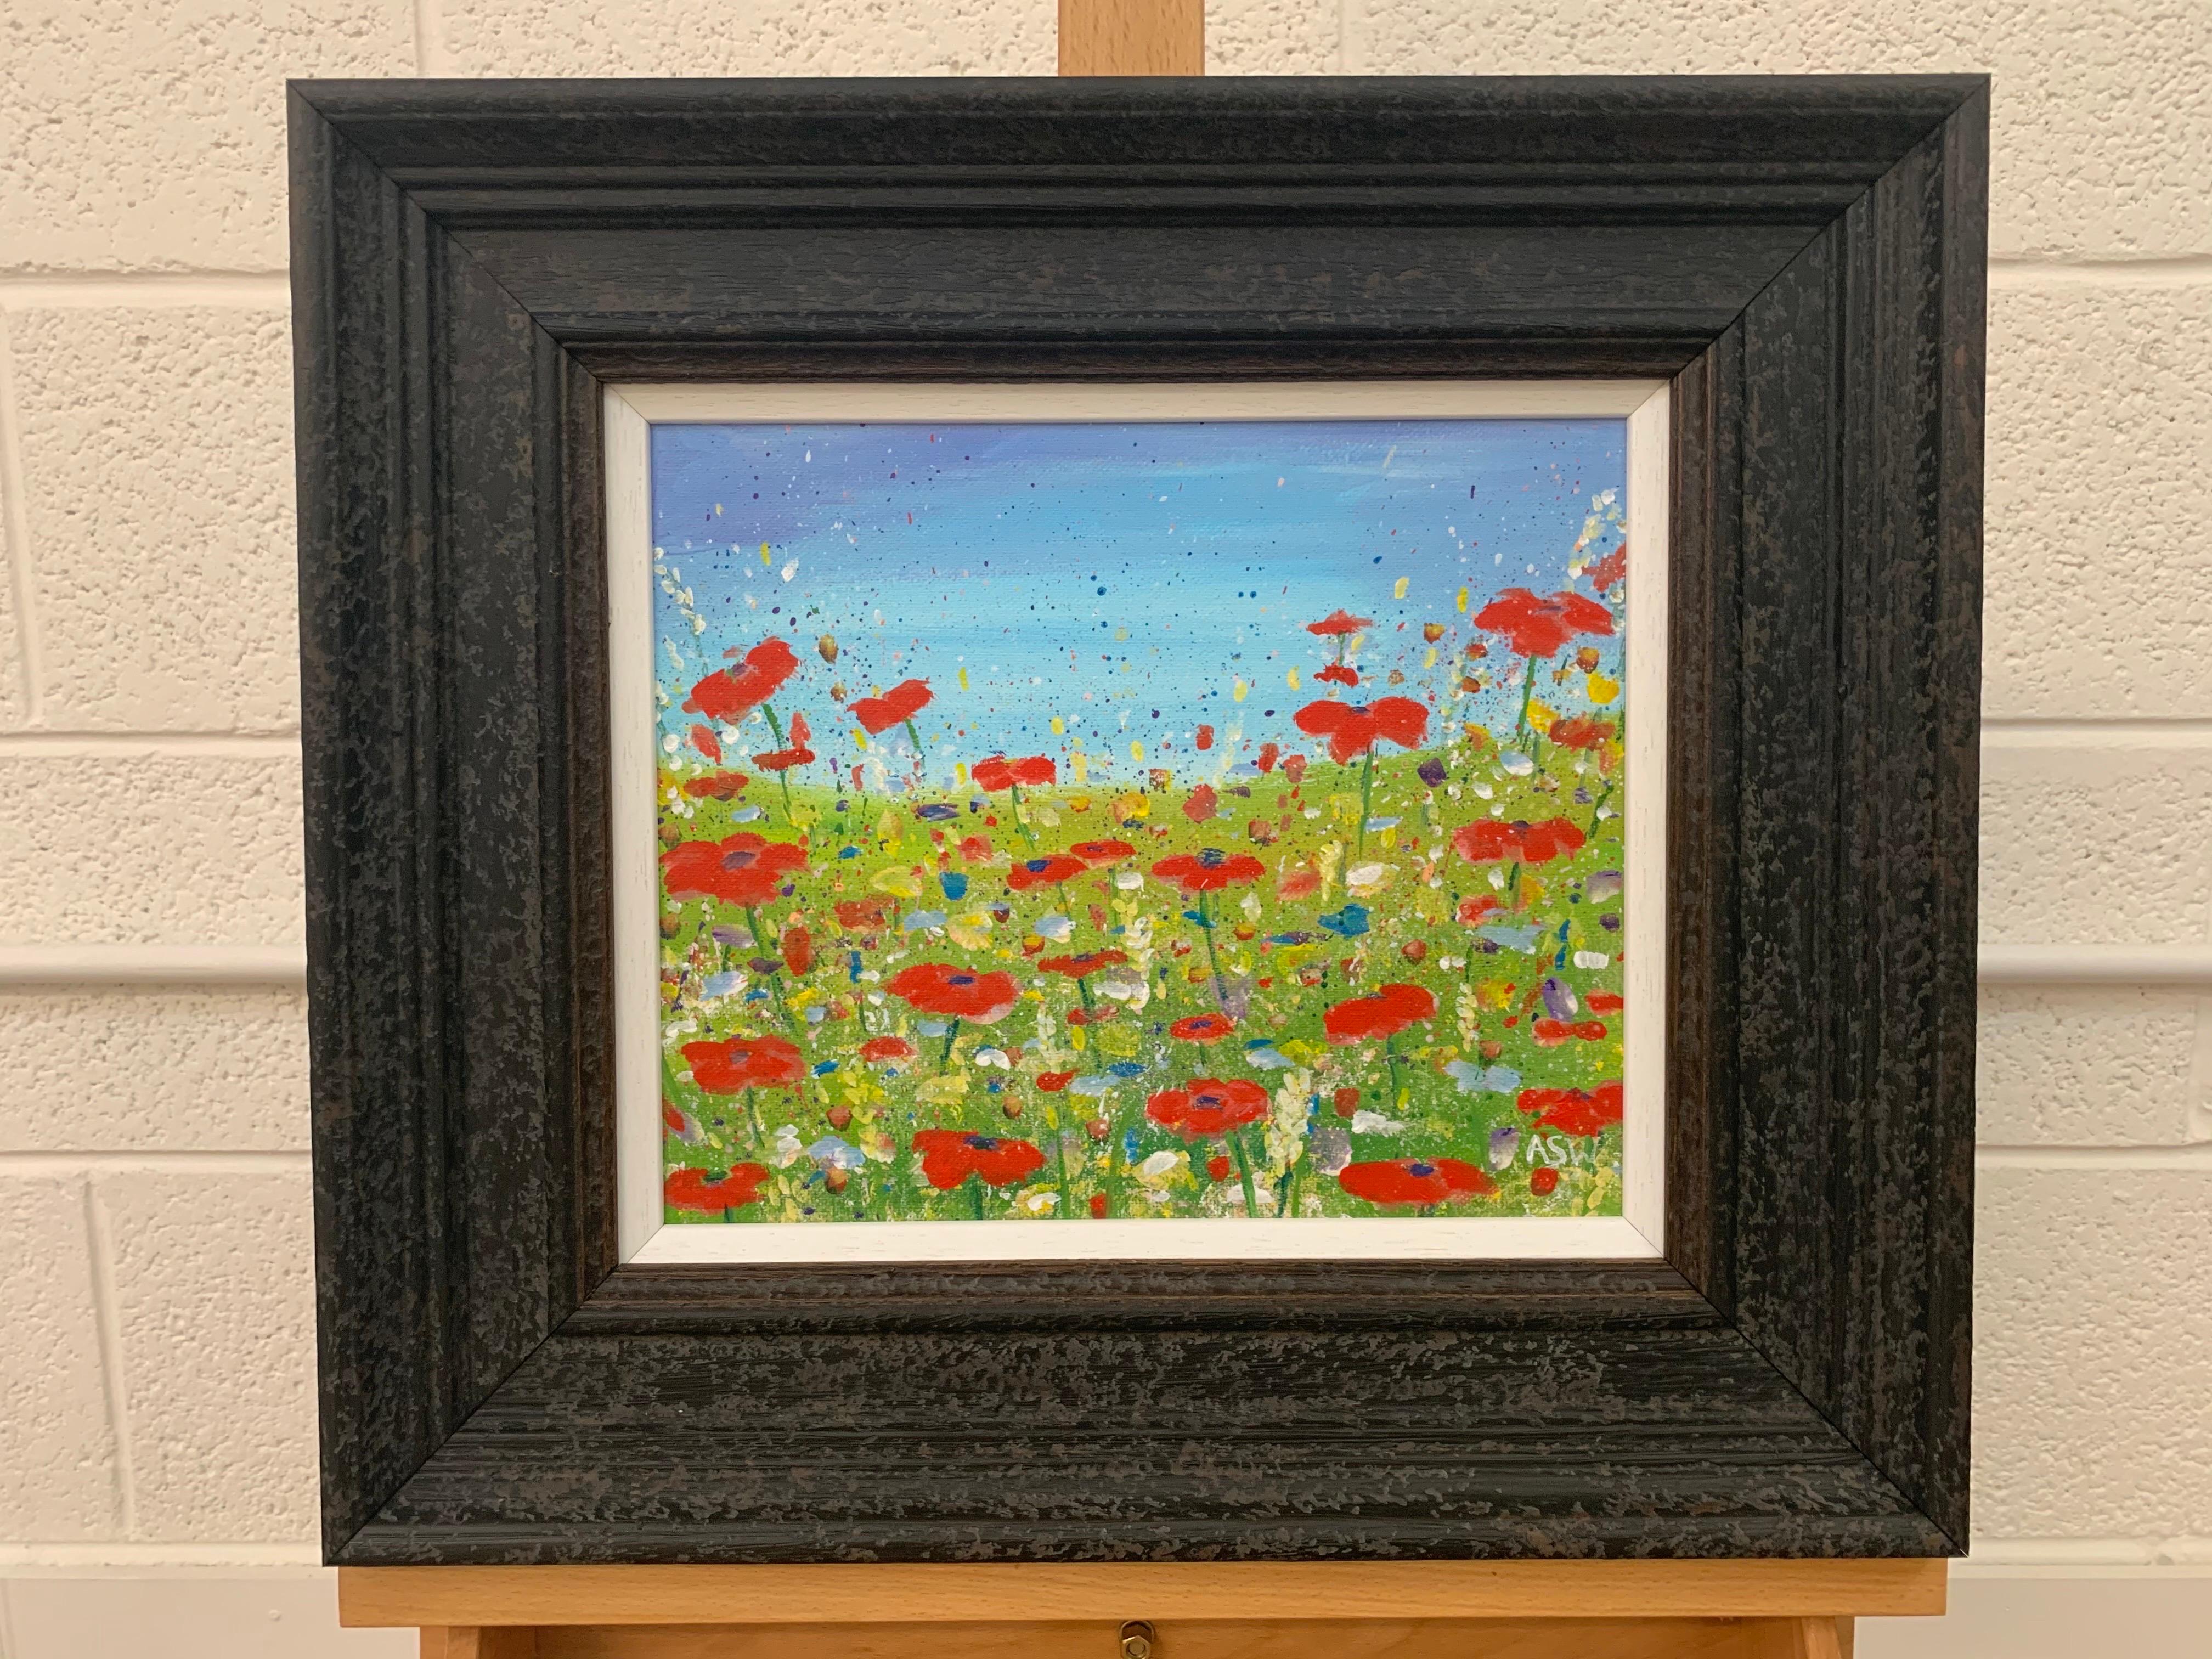 Impressionistic Wild Red Flowers in an English Meadow by British Contemporary Artist, Angela Wakefield. This original is from the 'Spring Burst' Interior Design Series. Framed in a high quality off-black contemporary wooden moulding with a white